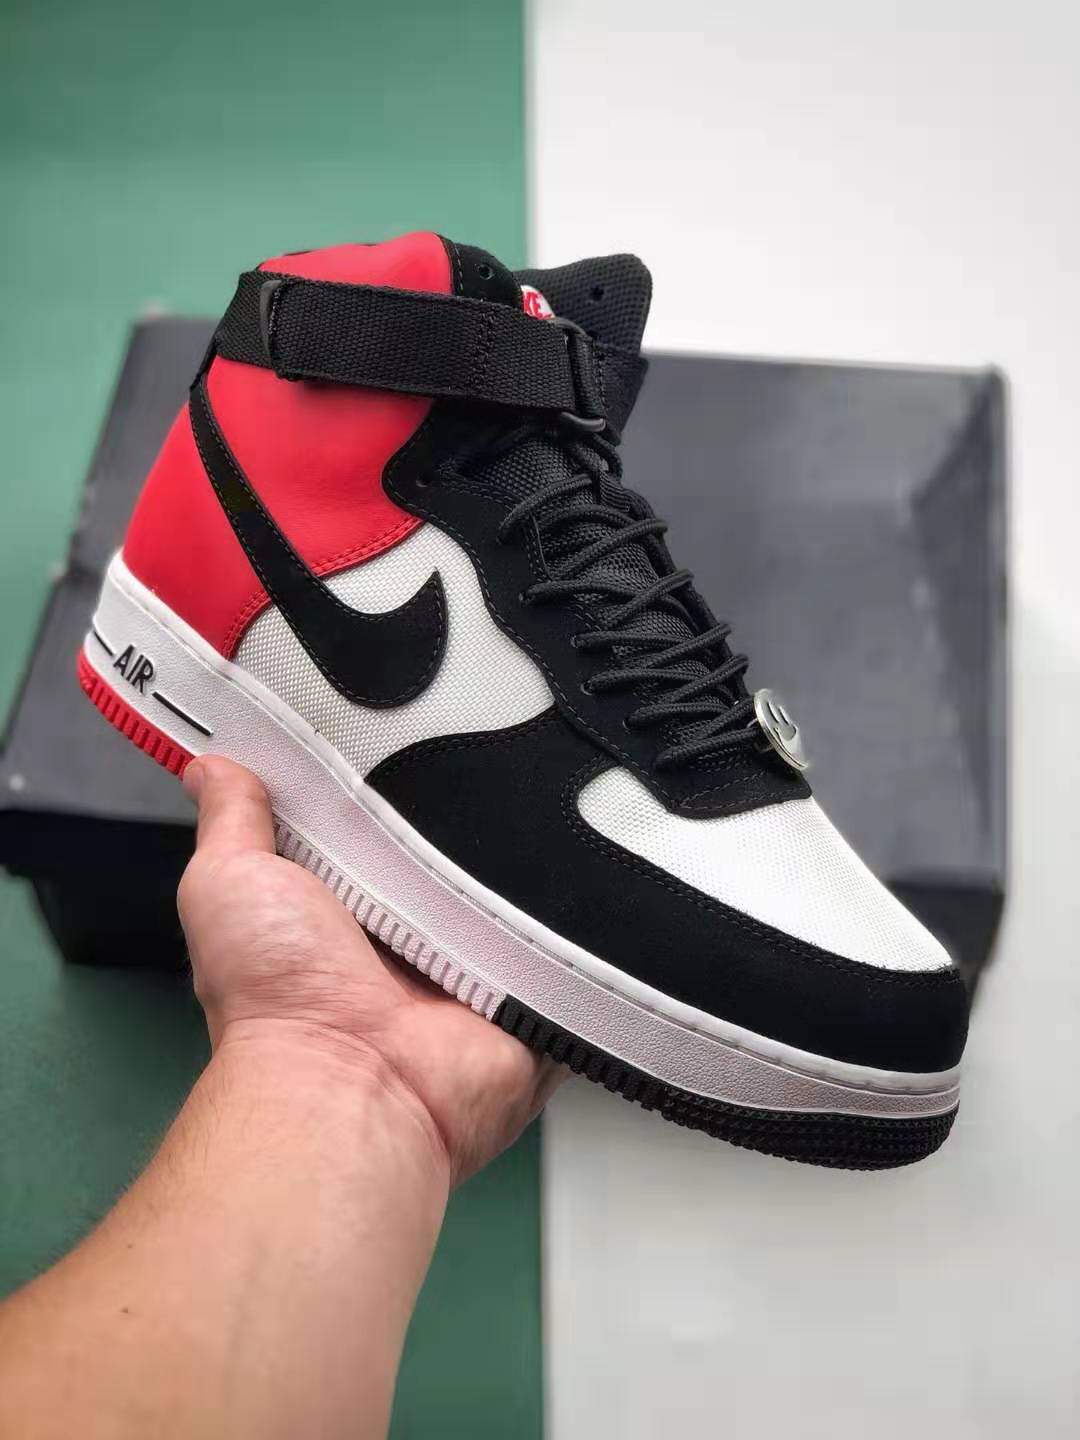 Nike Air Force 1 High 07 LV8 Have a Nike Day Black White Red CI2306-303 - Shop Now for Classic Style!